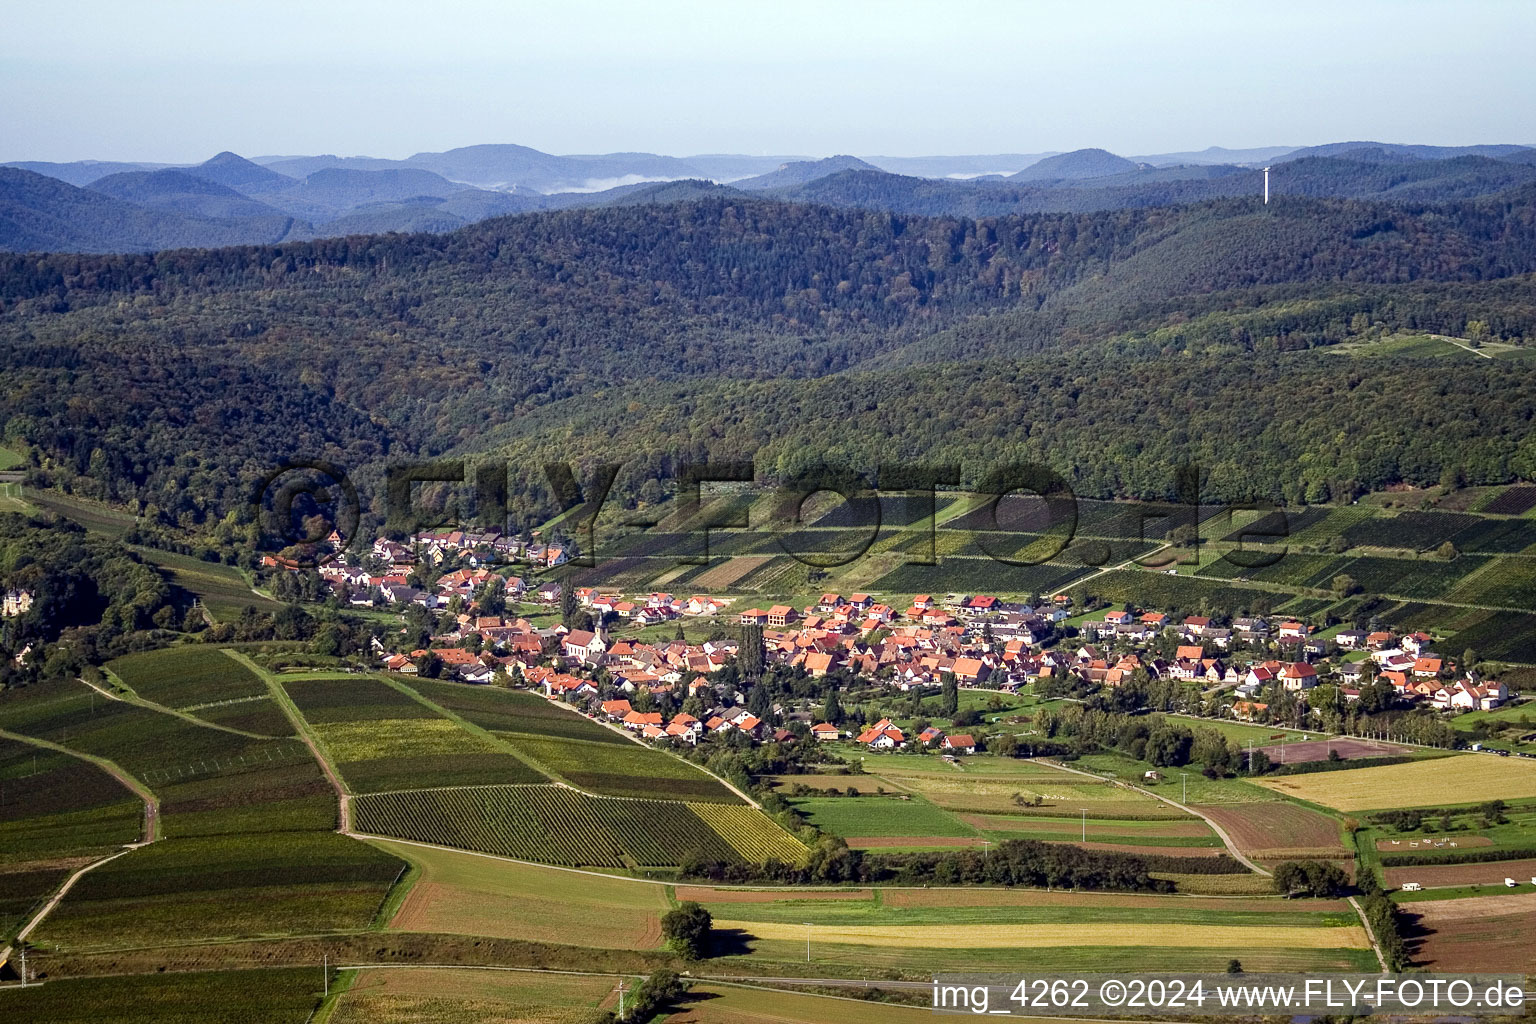 Village - view on the edge of agricultural fields and farmland in the district Pleisweiler in Pleisweiler-Oberhofen in the state Rhineland-Palatinate